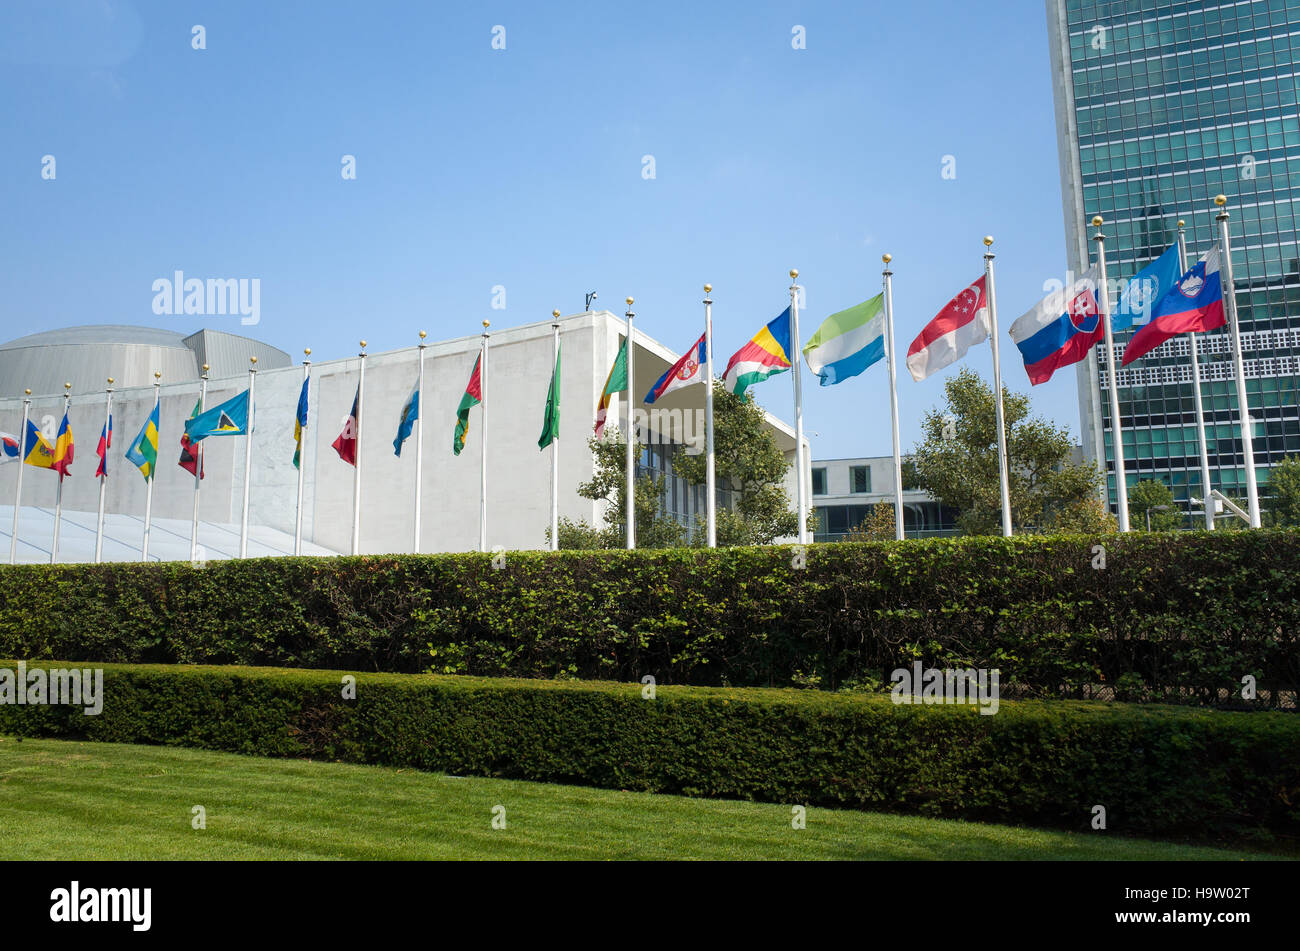 UN United Nations general assembly building with world flags flying in front on a sunny day with blue skies - First Avenue, New York City, NY, USA Stock Photo